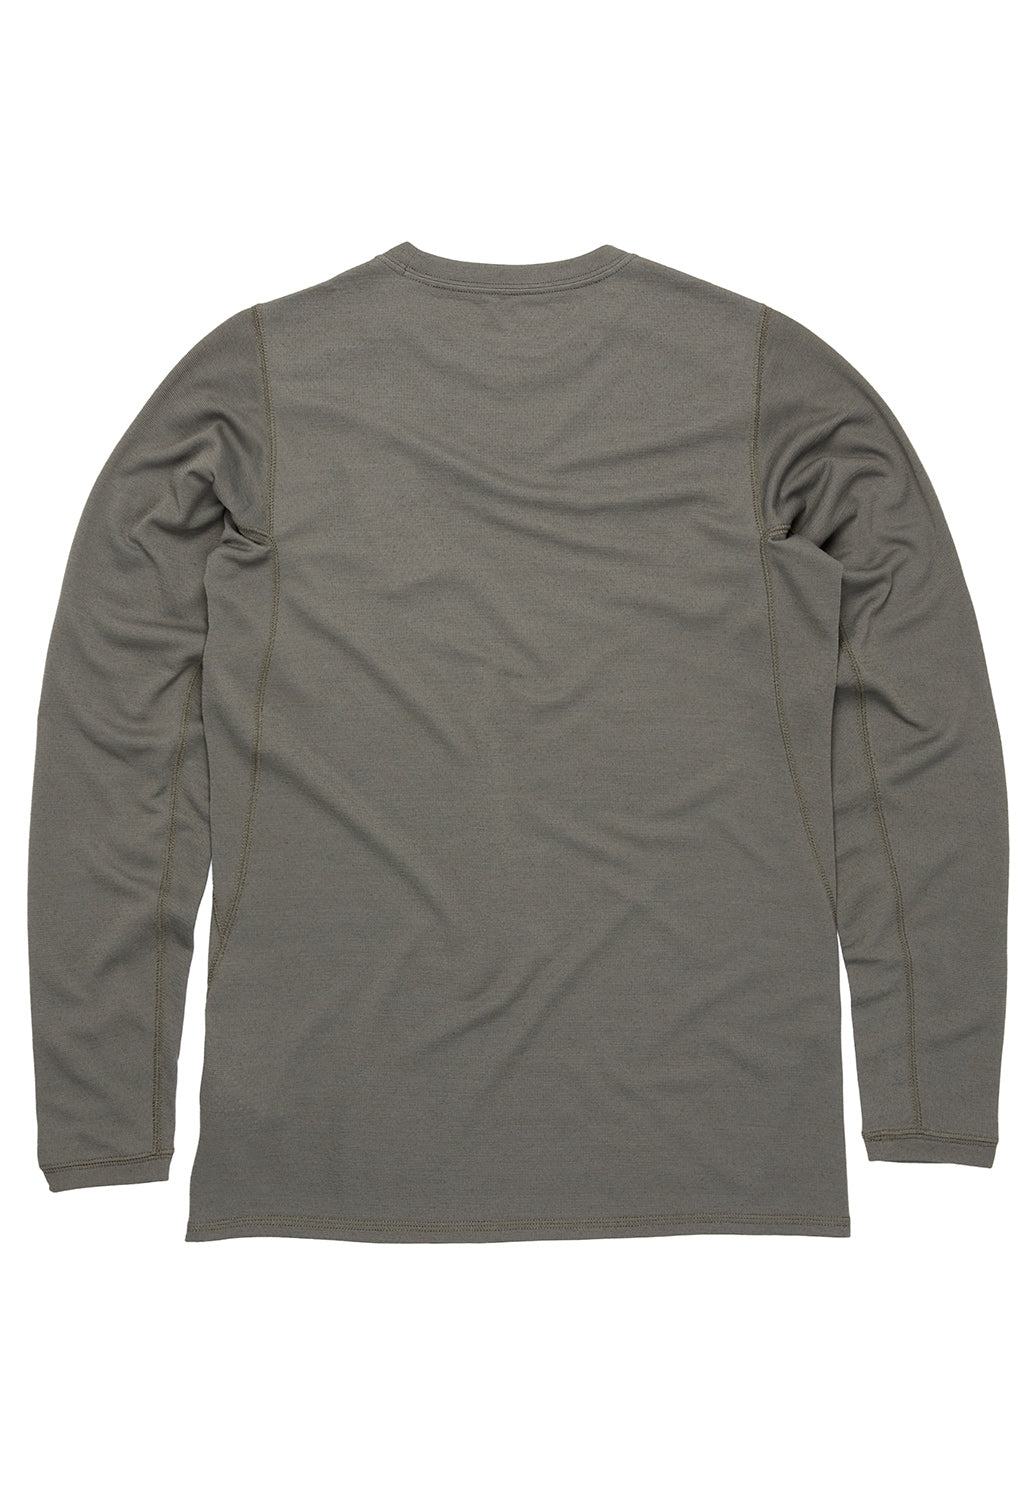 Snow Peak Men's Recycled Pe/Wo Long Sleeved T-Shirt - Olive